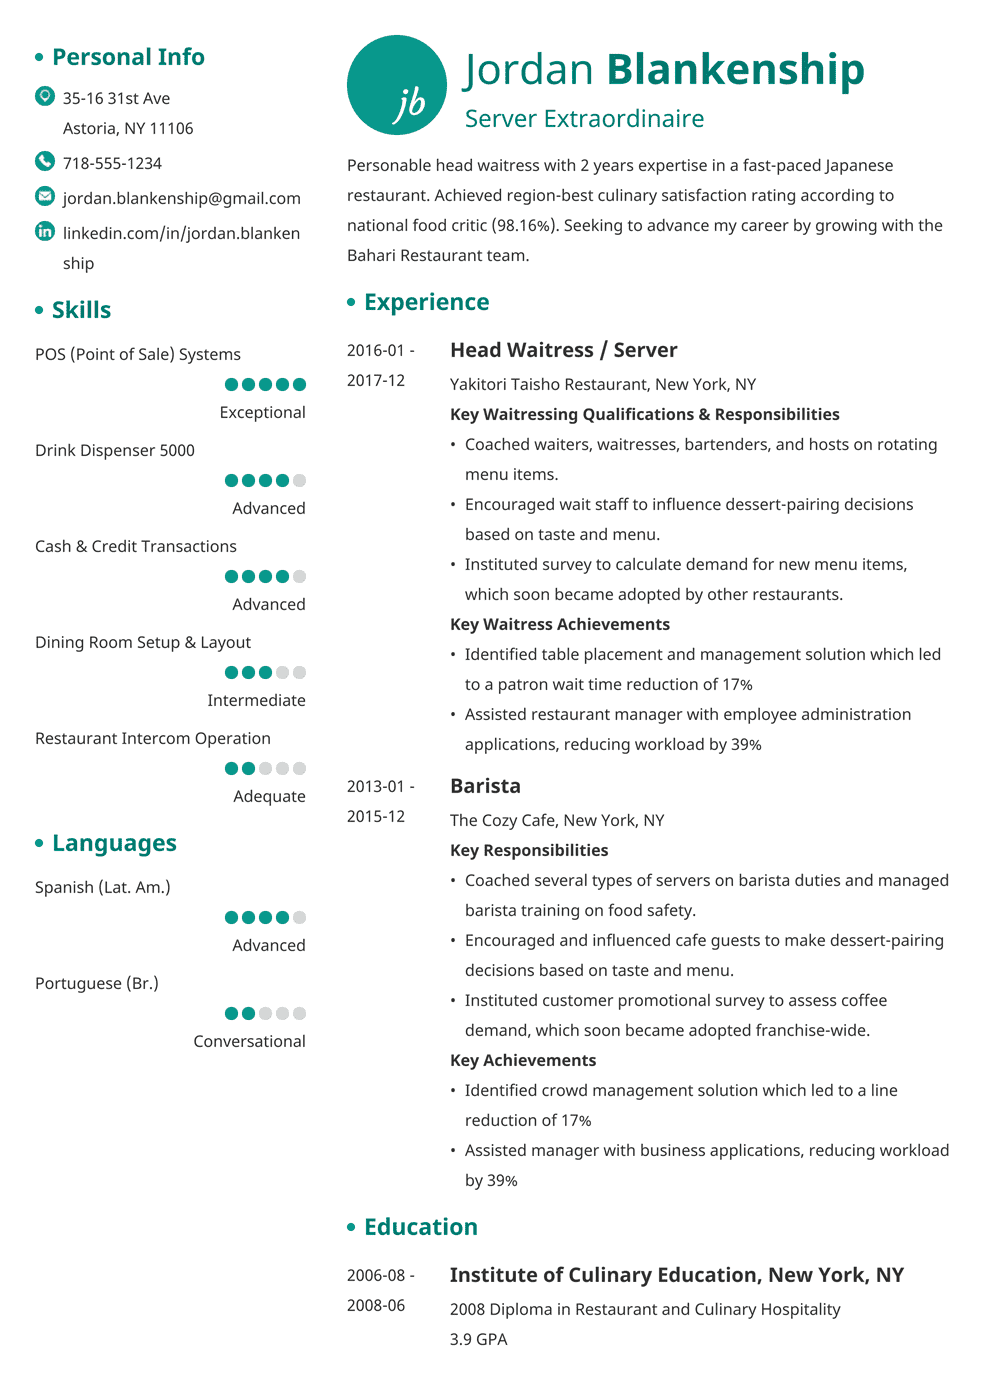 Food Service Resume Examples with Skills & Job Description